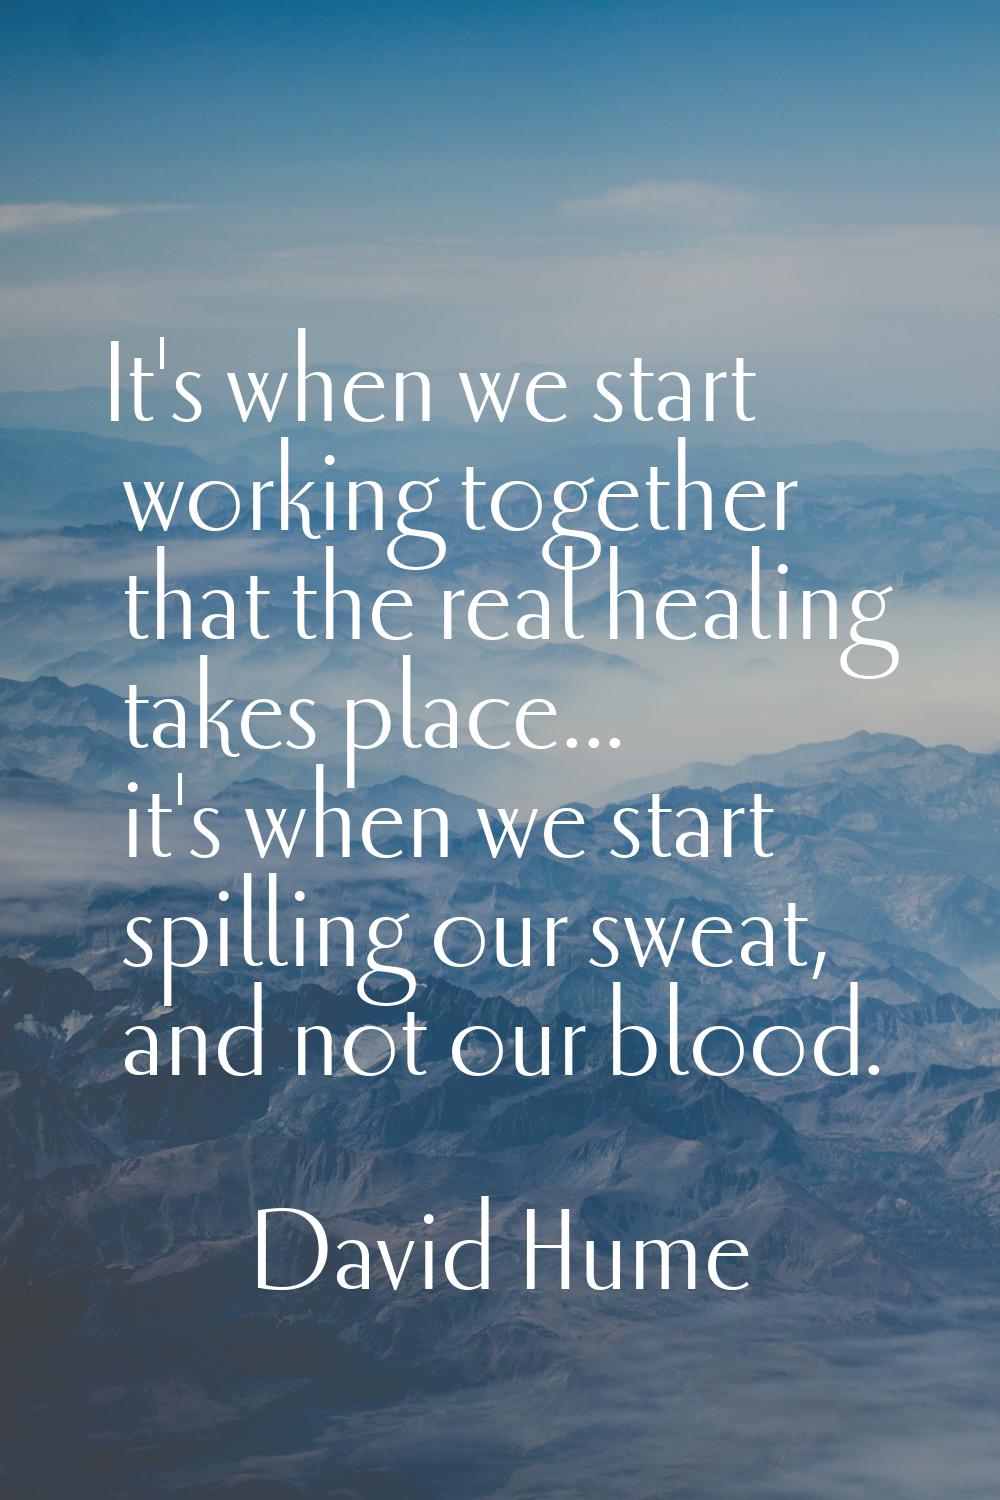 It's when we start working together that the real healing takes place... it's when we start spillin